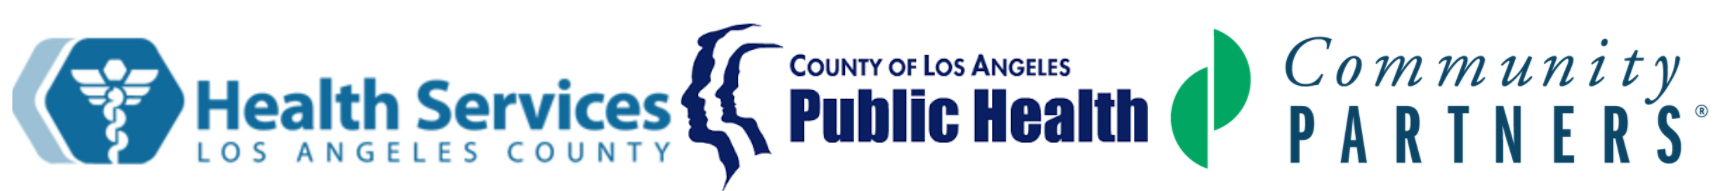 County and CP logos